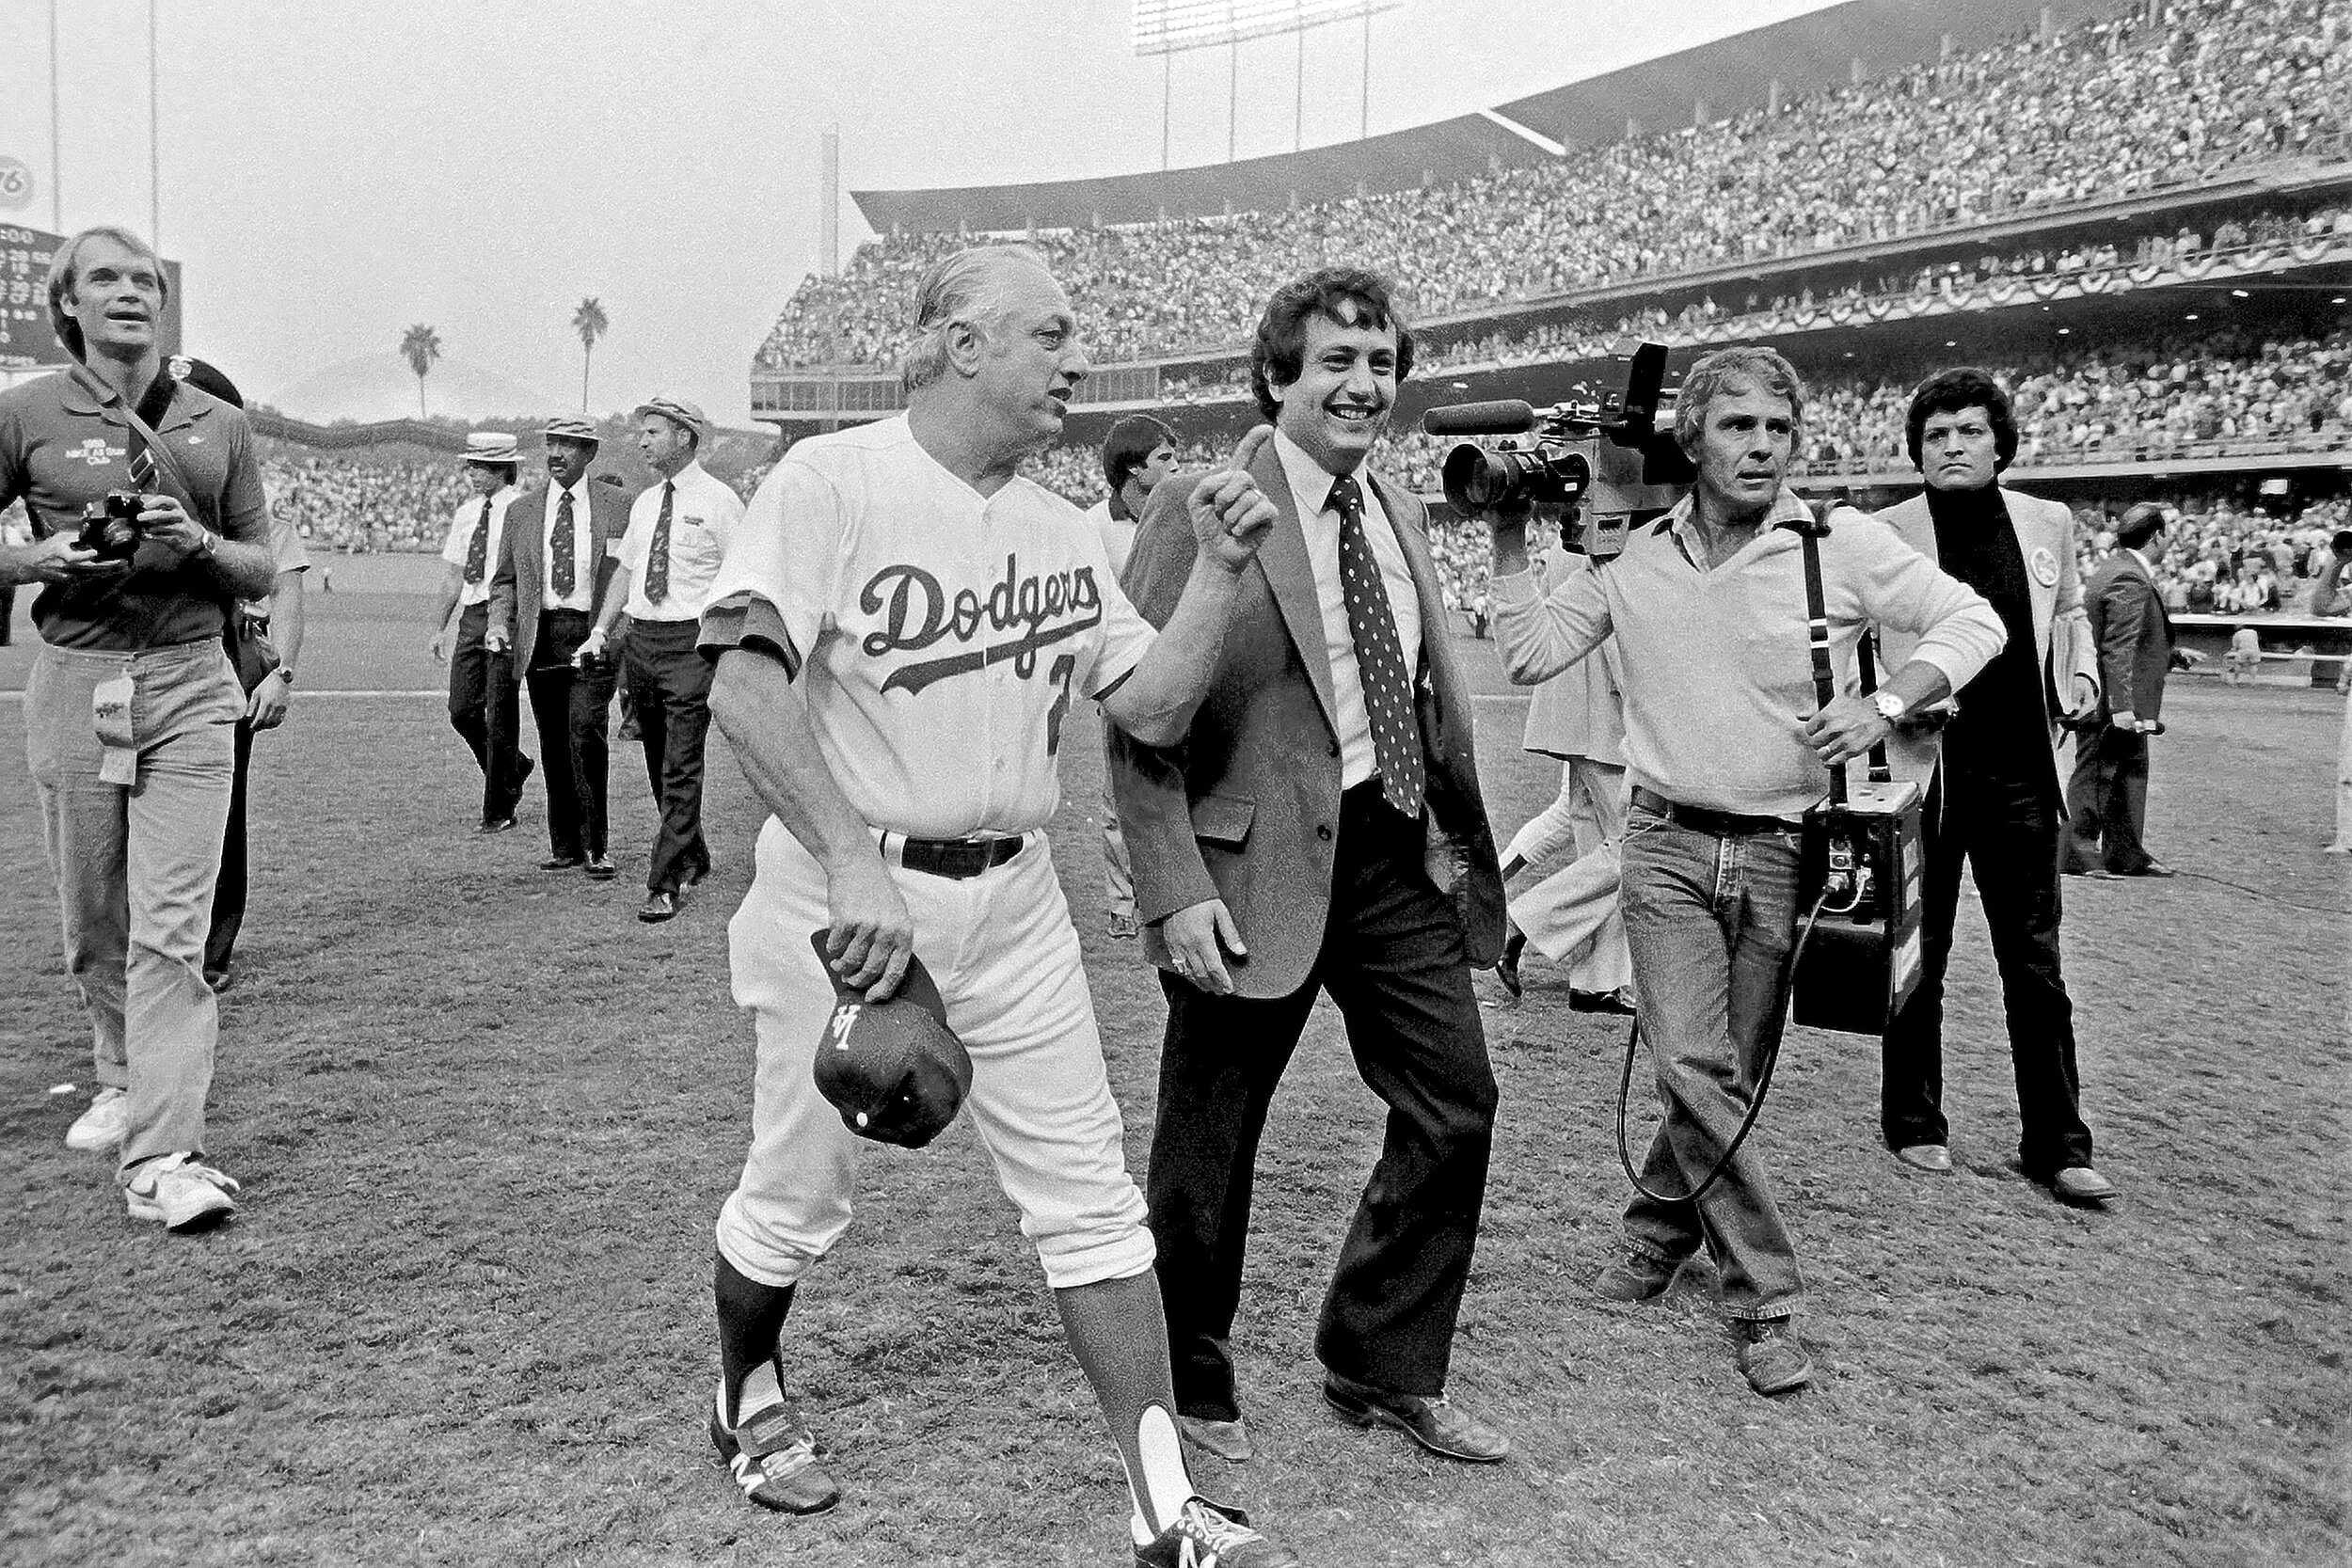  LOS ANGELES, CA - OCTOBER 25, 1981: Steve Brenner, head of public relations, talks with manager Tommy Lasorda #2 of the Los Angeles Dodgers as he walks off the field after defeating the New York Yankees in game 5 of the 1981 World Series at Dodger S